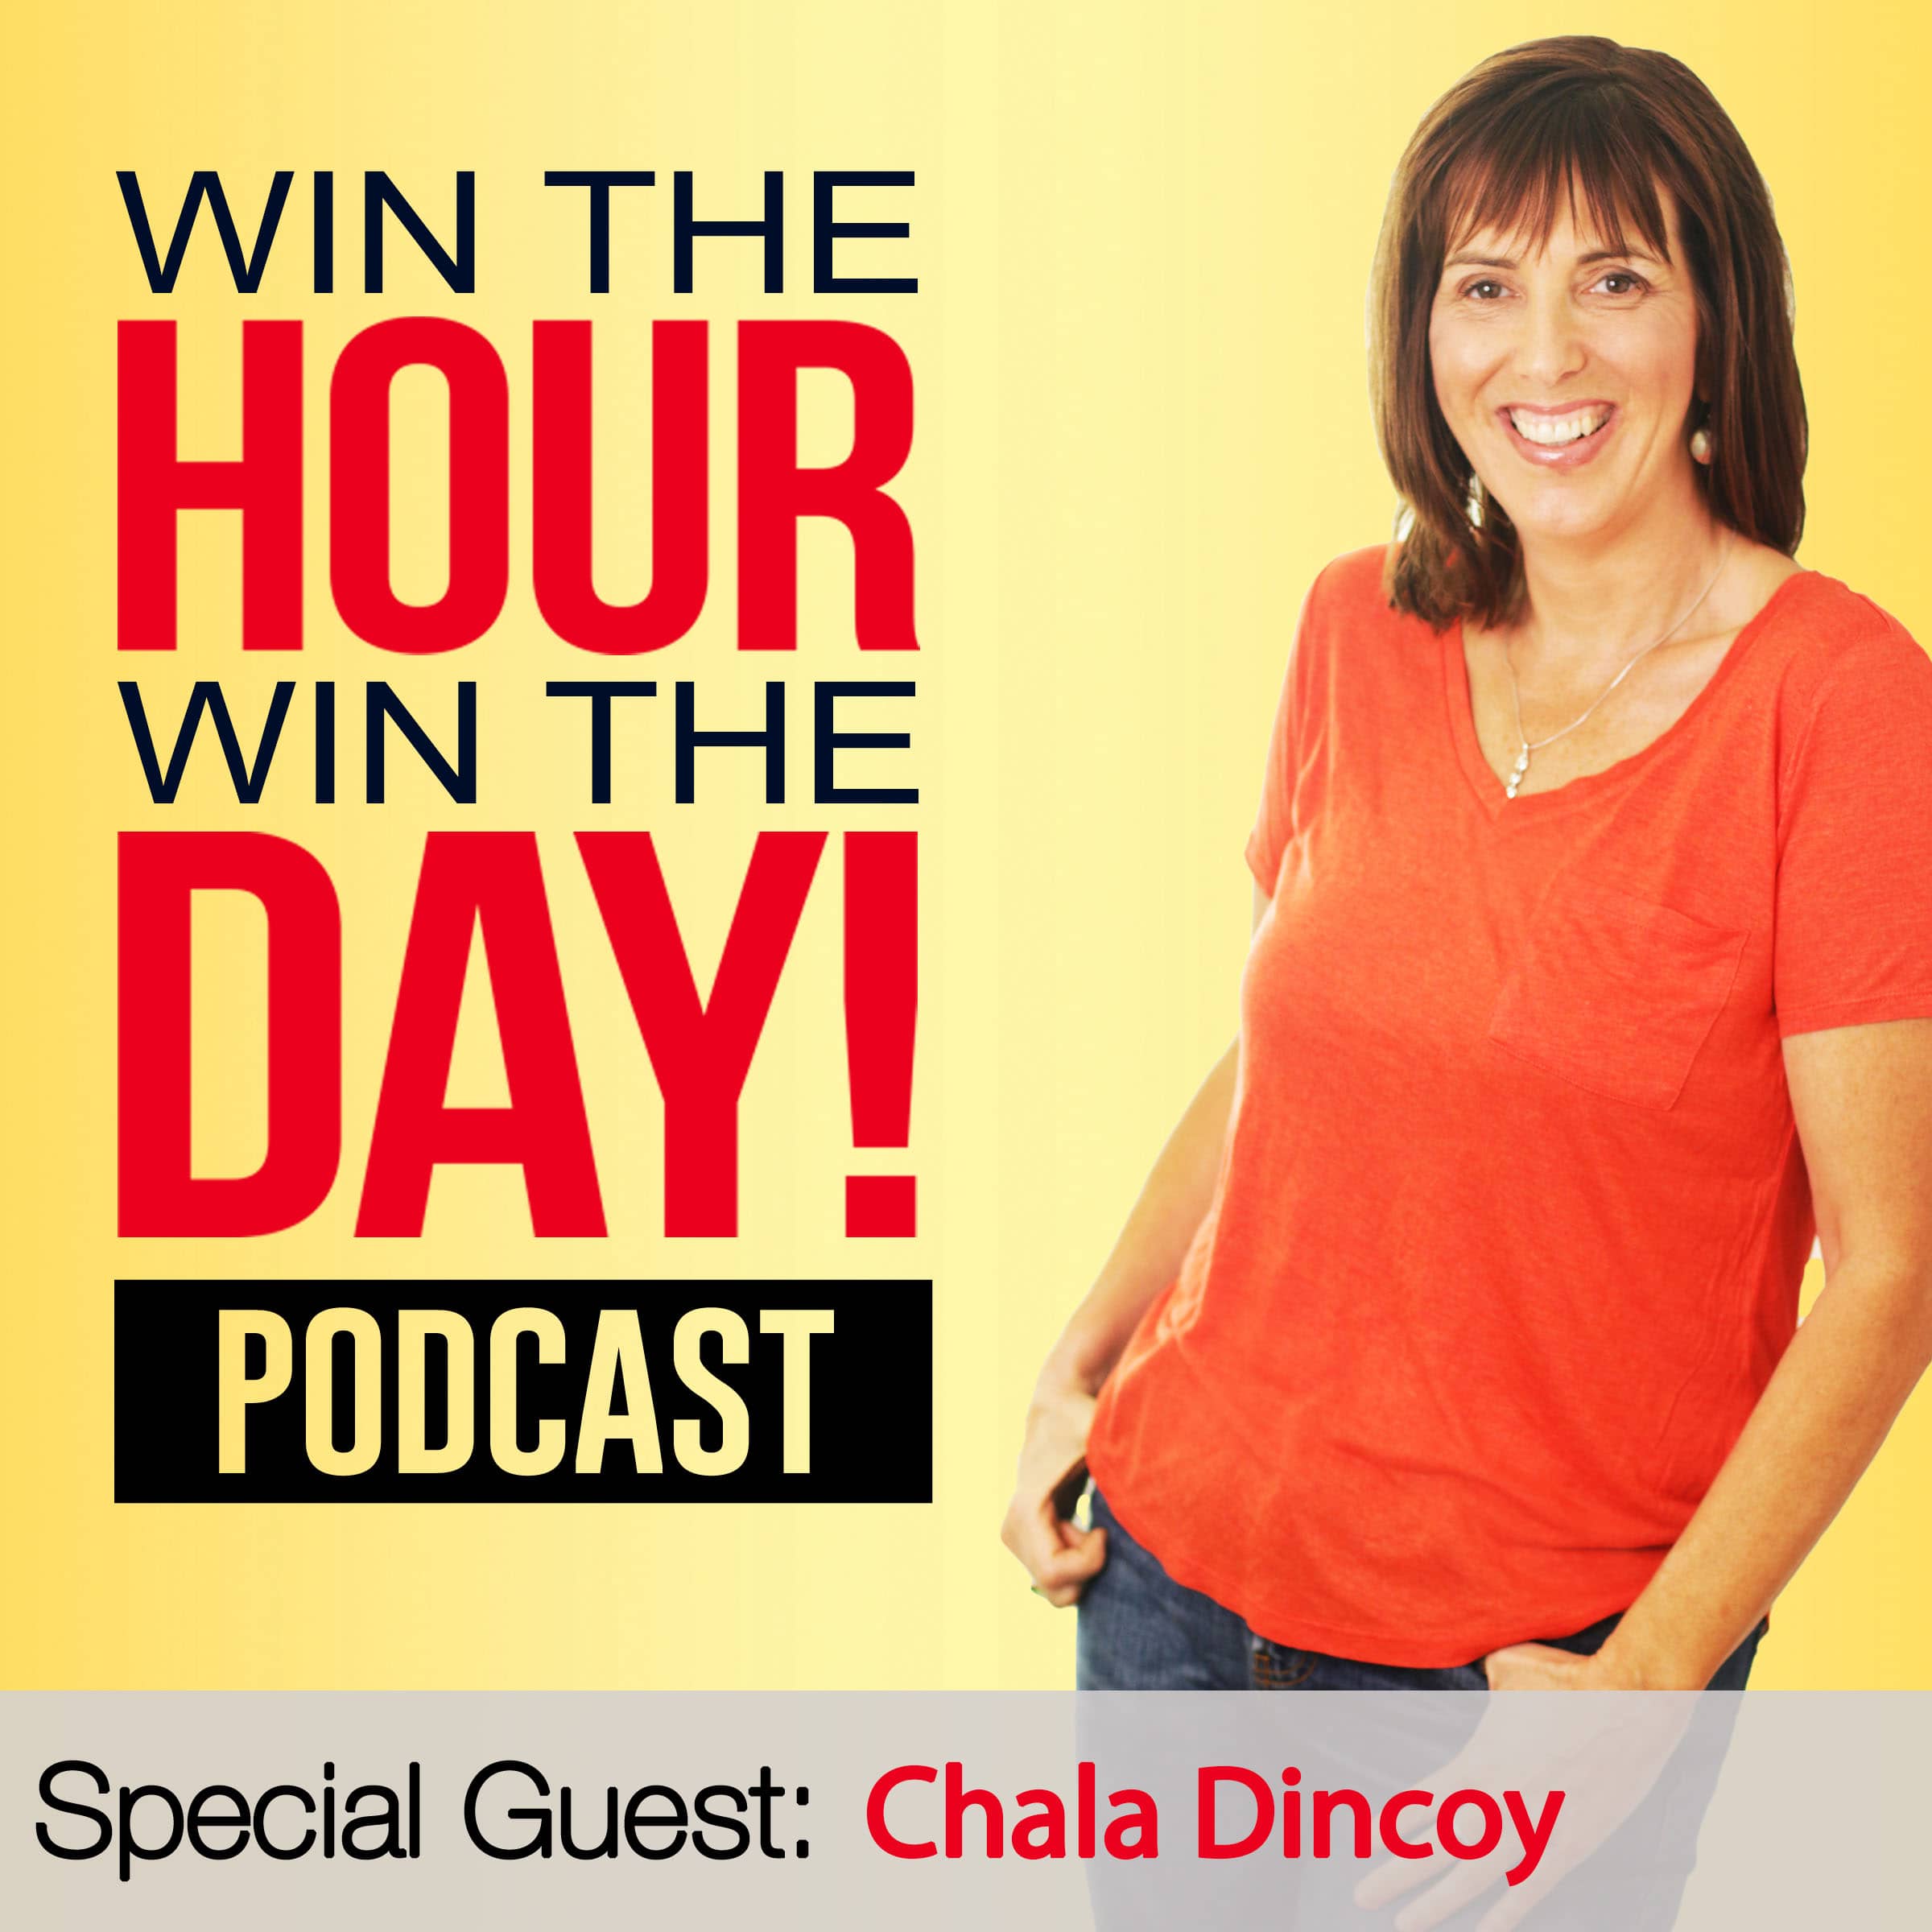 How To Improve Business Temperature With Your Pitch! With Chala Dincoy